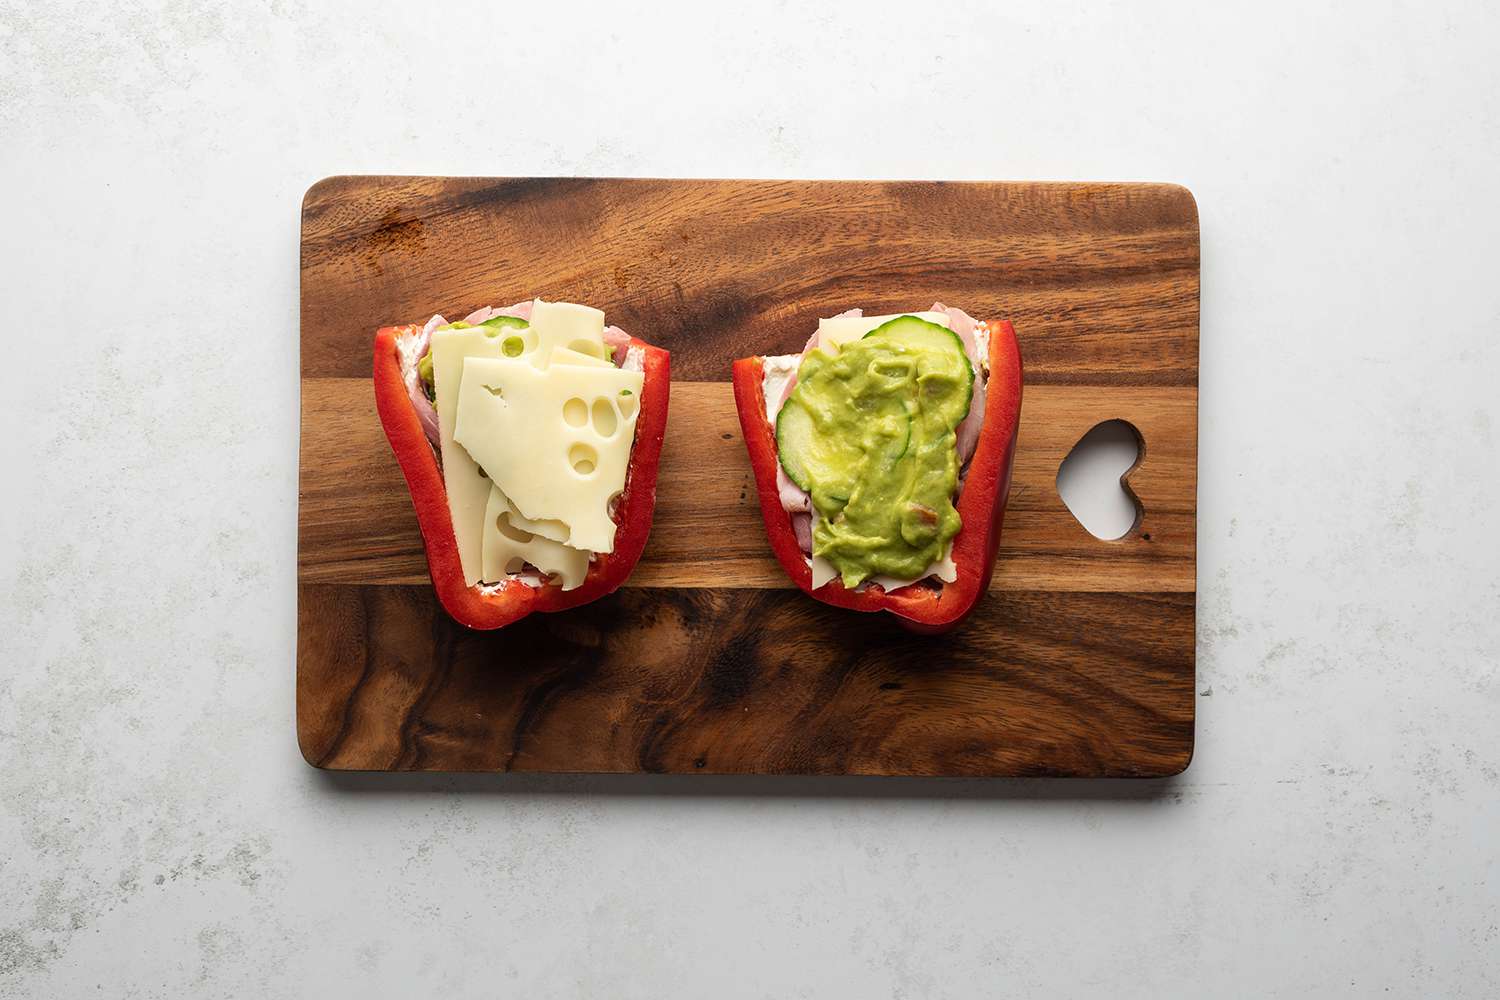 Ham, cheese, cucumbers, cream cheese and guacamole on the pepper 